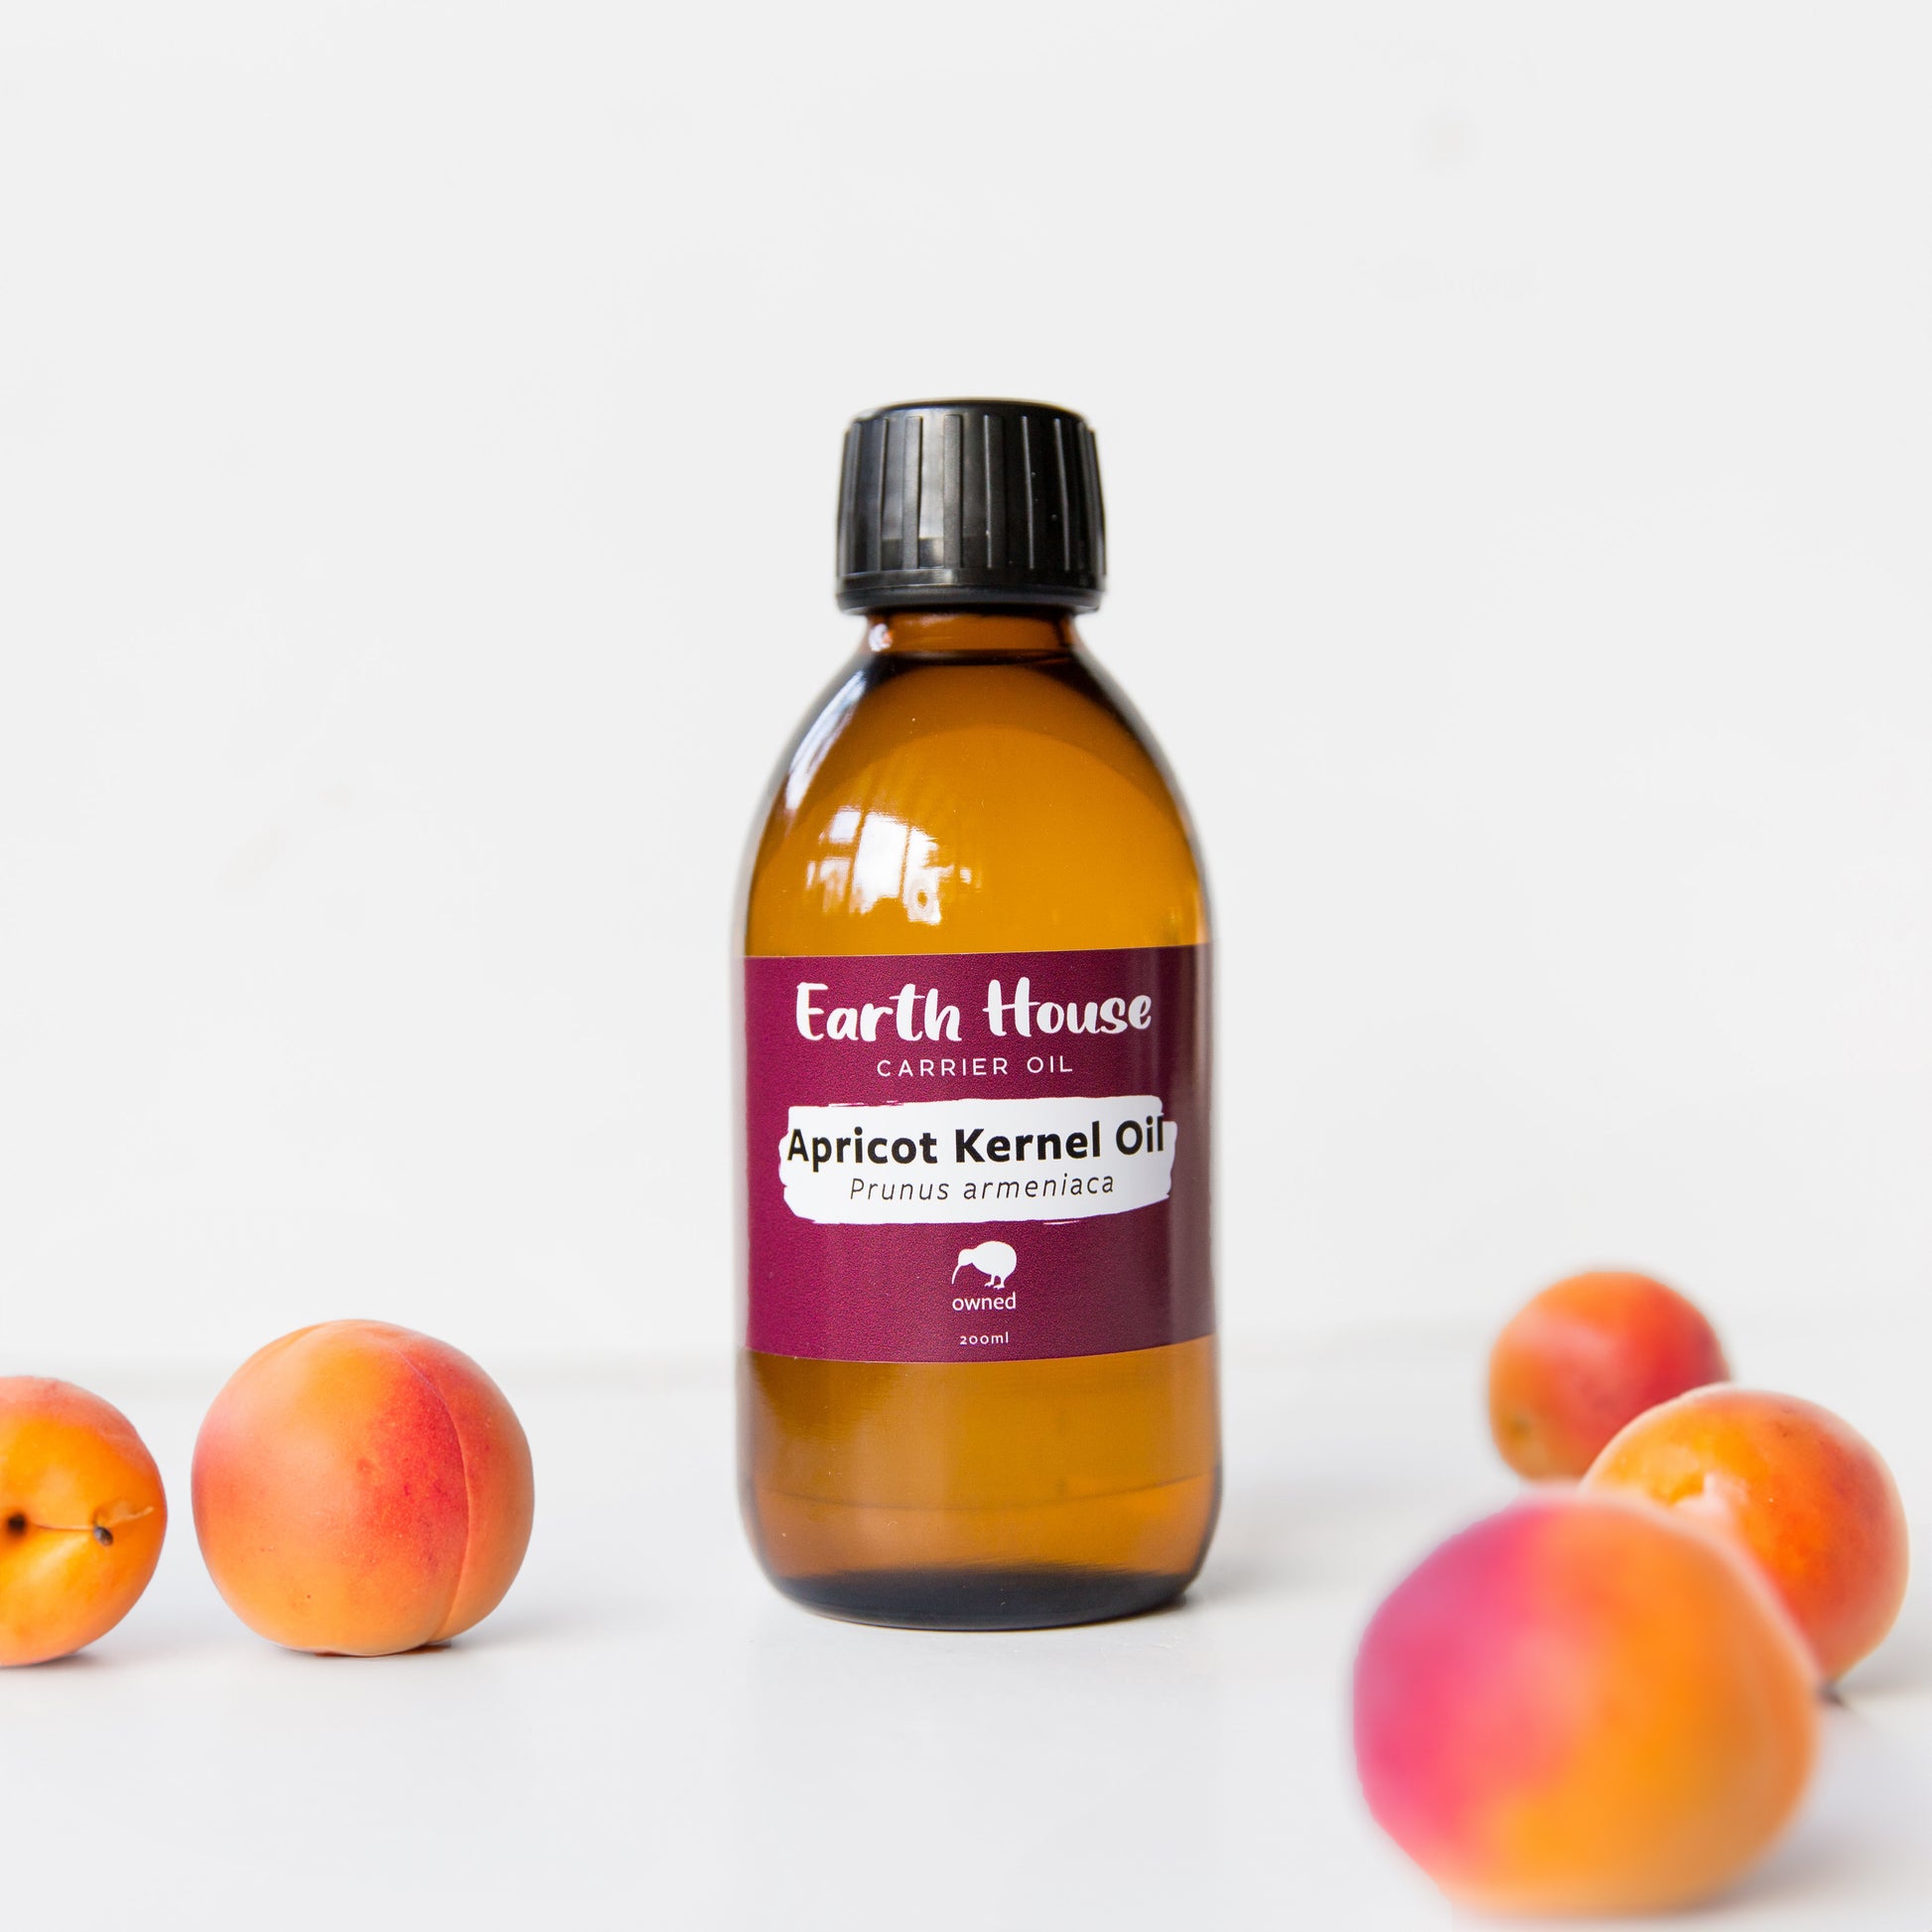 Bottle of Earth House NZ Apricot Kernel Oil, surrounding by fresh apricots